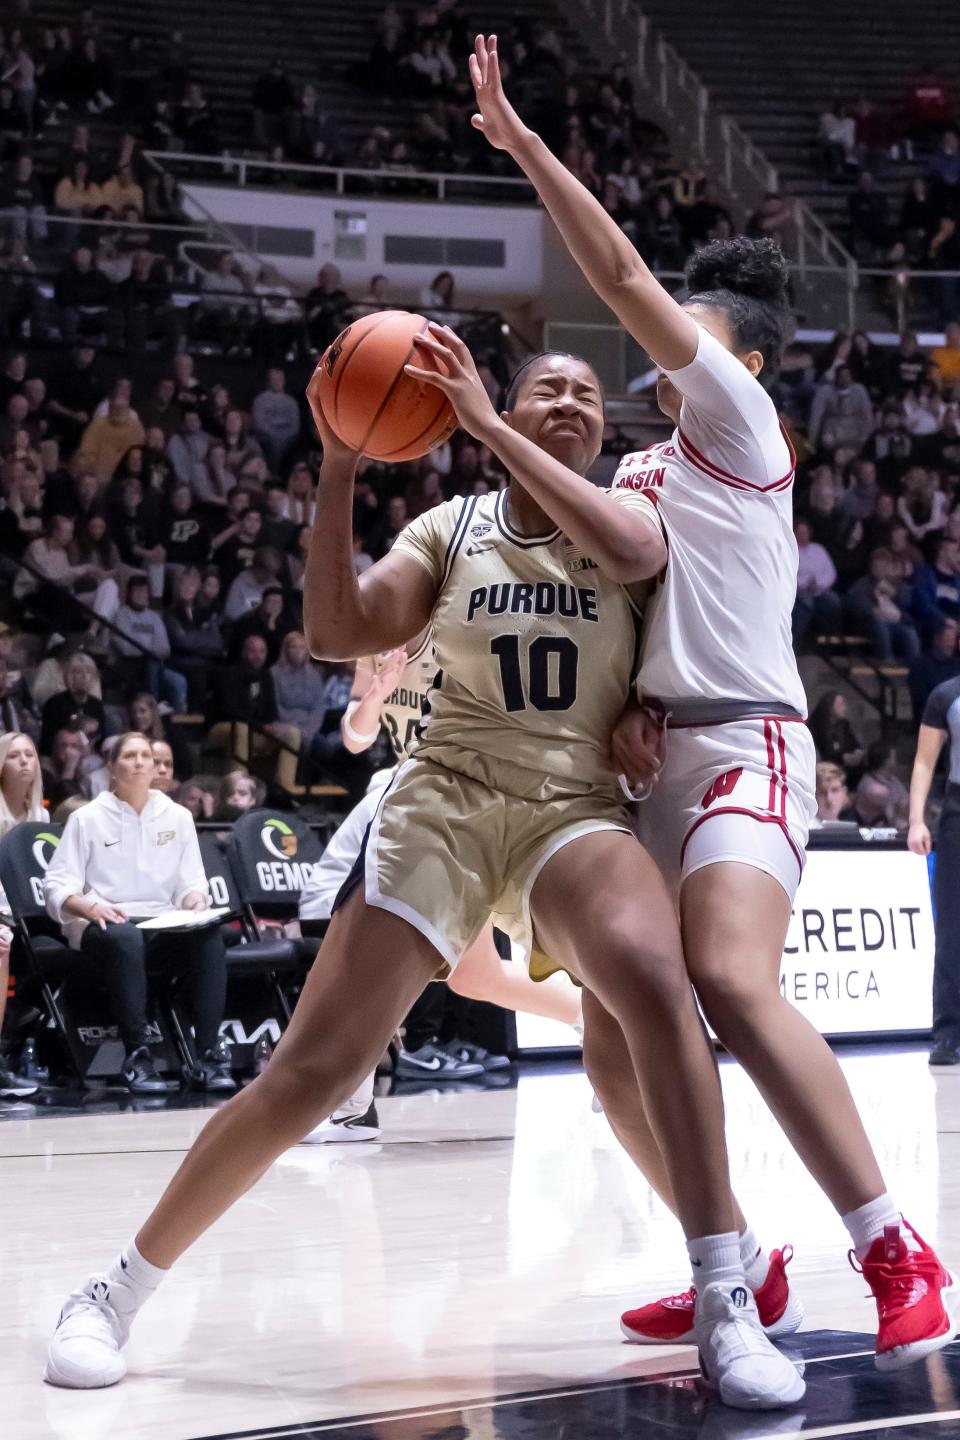 Purdue Boilermakers guard Jeanae Terry (10) takes contact on a drive during the NCAA women’s basketball game against the Wisconsin Badgers, Saturday Dec. 30, 2023, at Mackey Arena in West Lafayette, Ind. Purdue won 89-50.